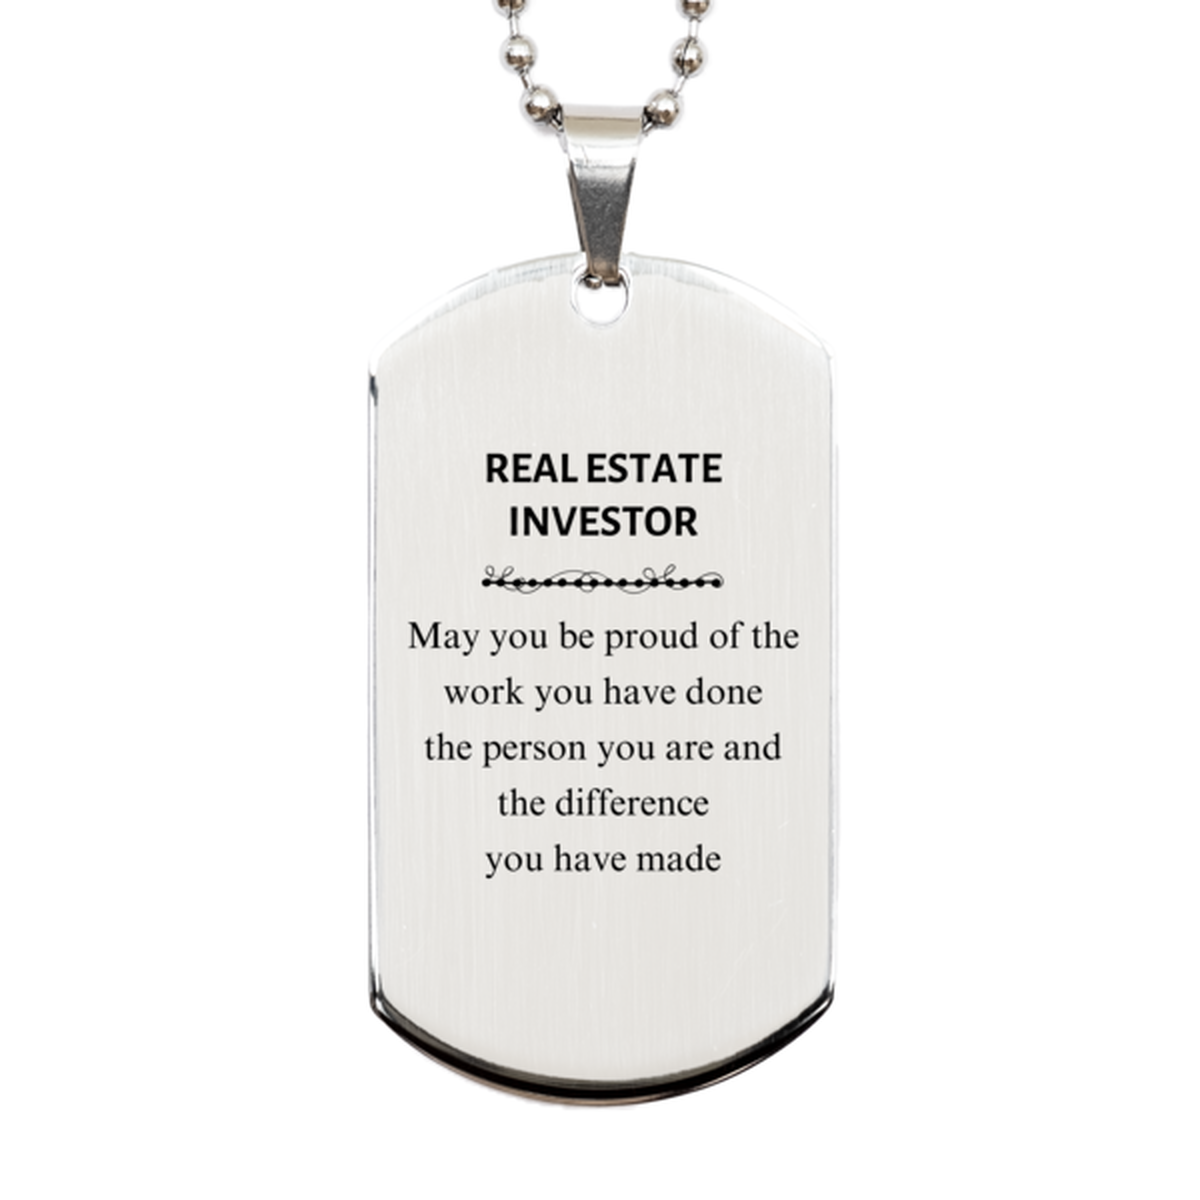 Real Estate Investor May you be proud of the work you have done, Retirement Real Estate Investor Silver Dog Tag for Colleague Appreciation Gifts Amazing for Real Estate Investor